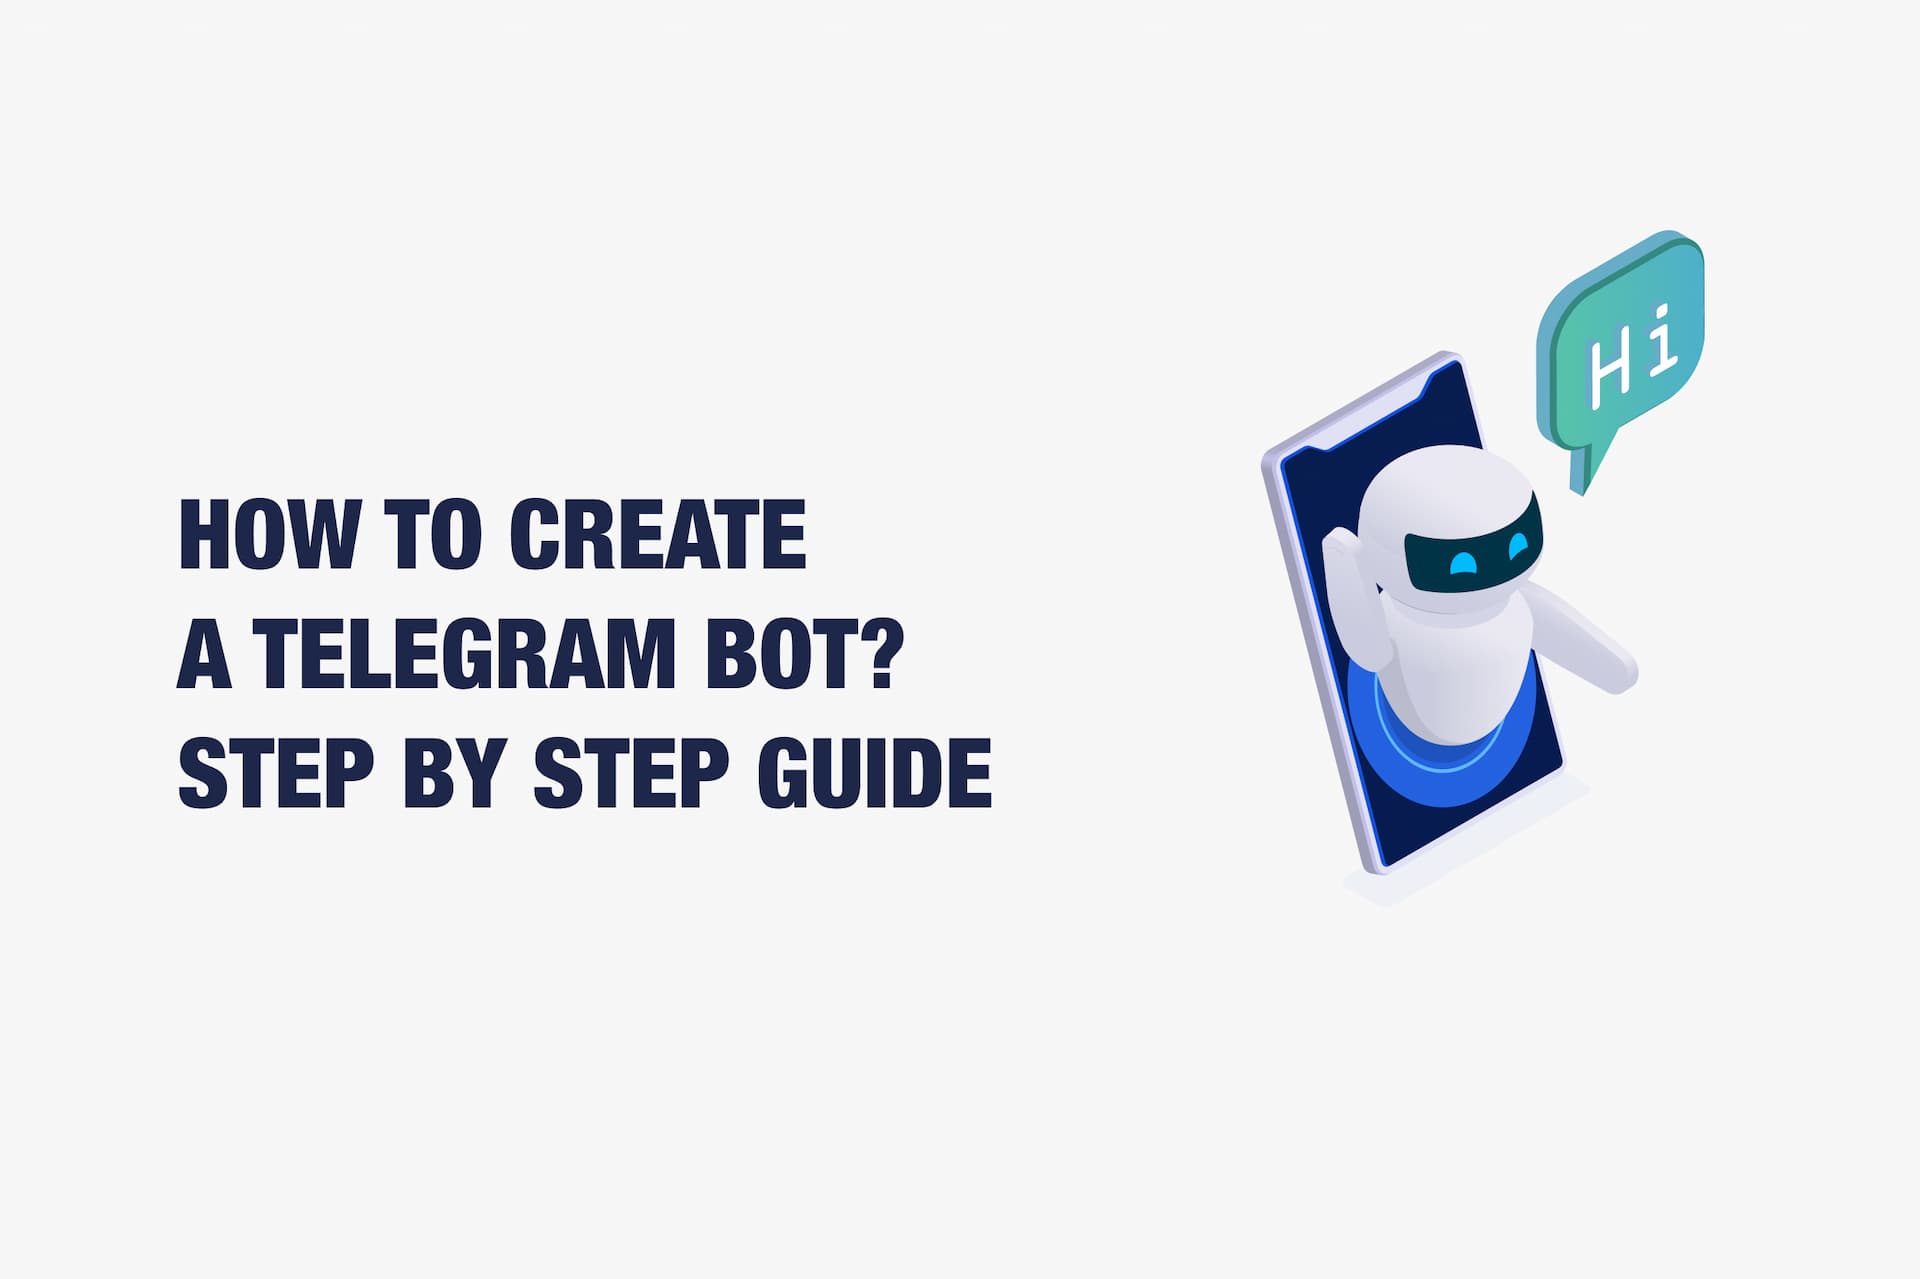 How to Create a Telegram Bot Without Coding? Step by Step Guide